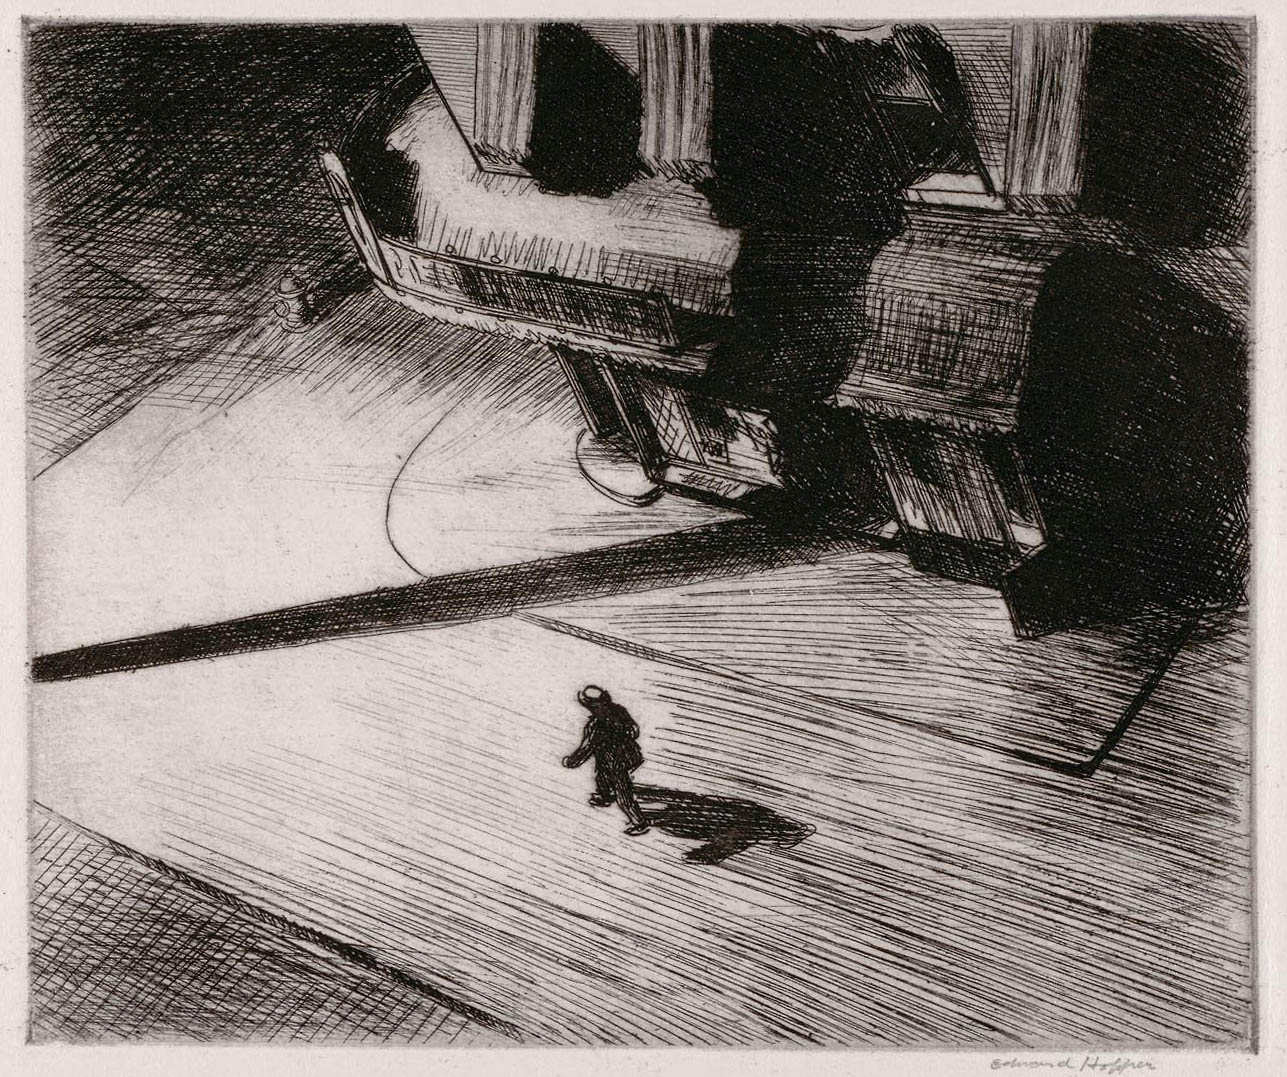 Hopper's spooky 1921 etching "Night Shadows" is part of the special exhibit at Carnegie Museum. The show includes bright and sunny rural scenes, too, though it's unsure if this man will find them.